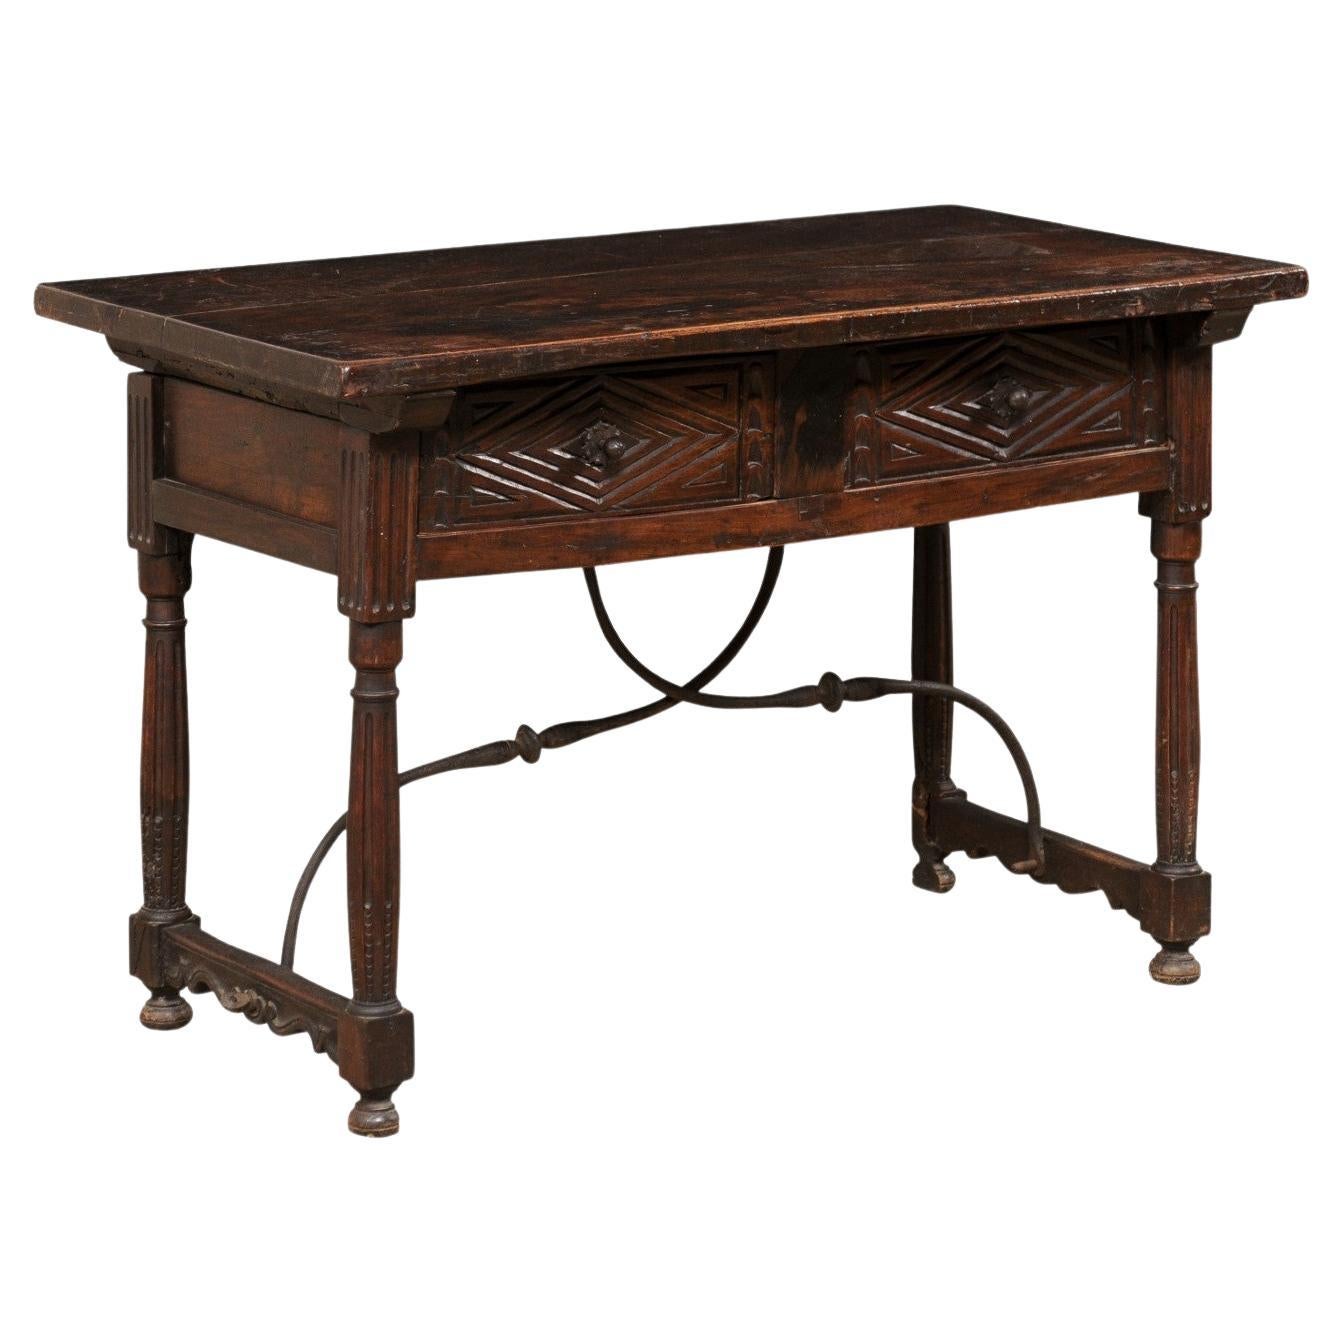 18th C. Italian Walnut Table W/2 Drawers & Decoratively Forged-Iron Stretcher For Sale